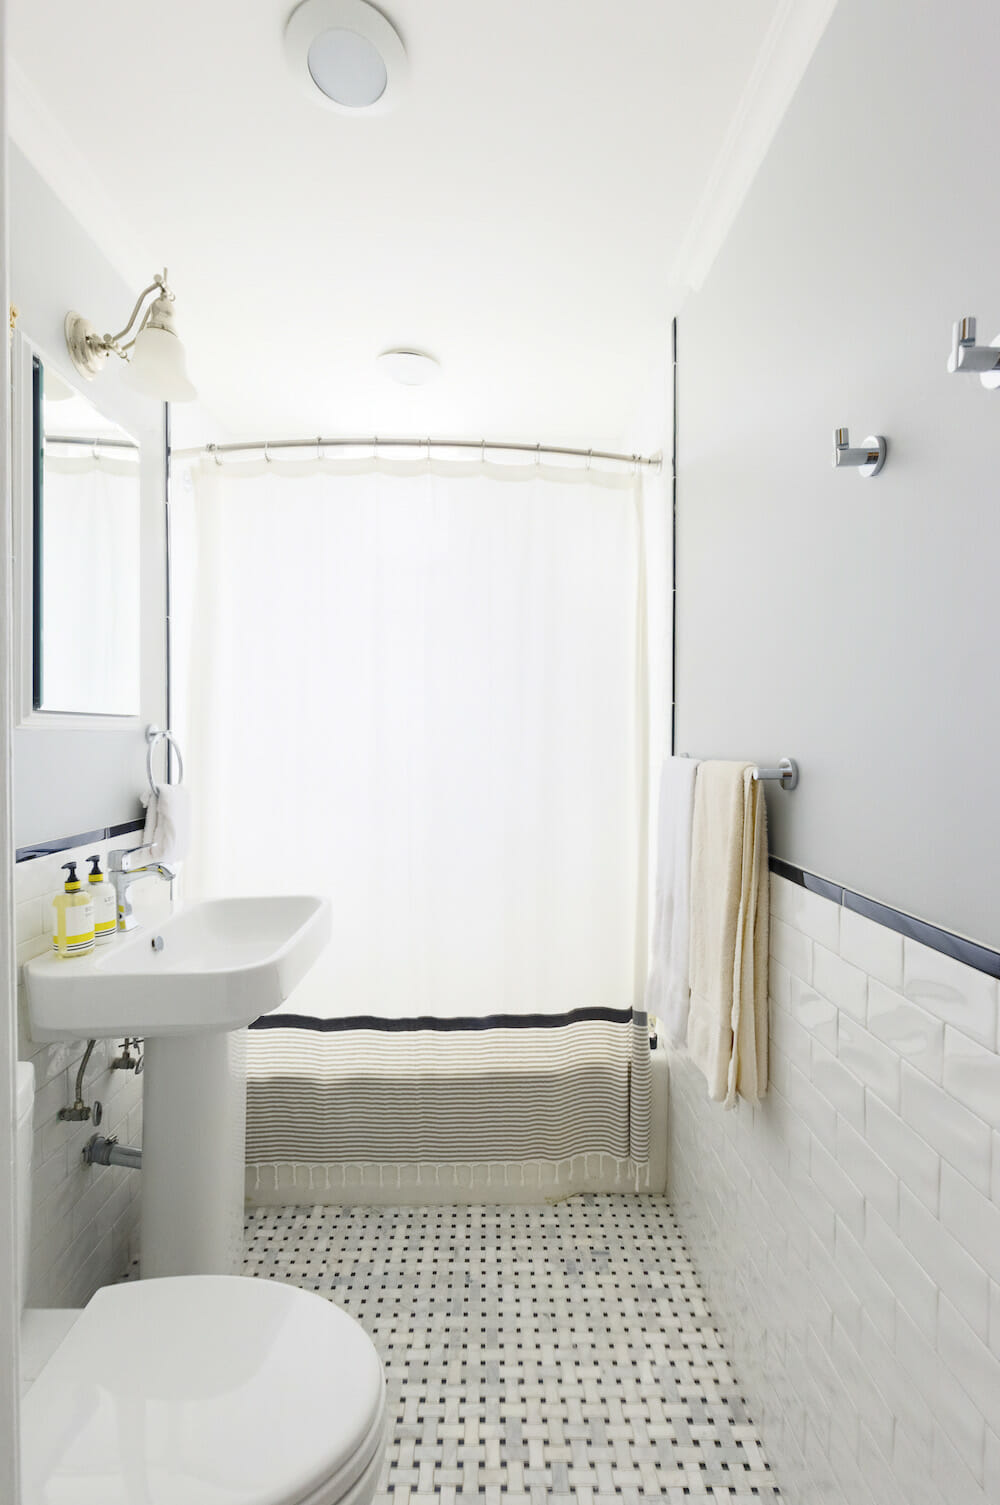 Bathroom Tiles And How Much They Cost, Cost To Tile Floor Bathroom